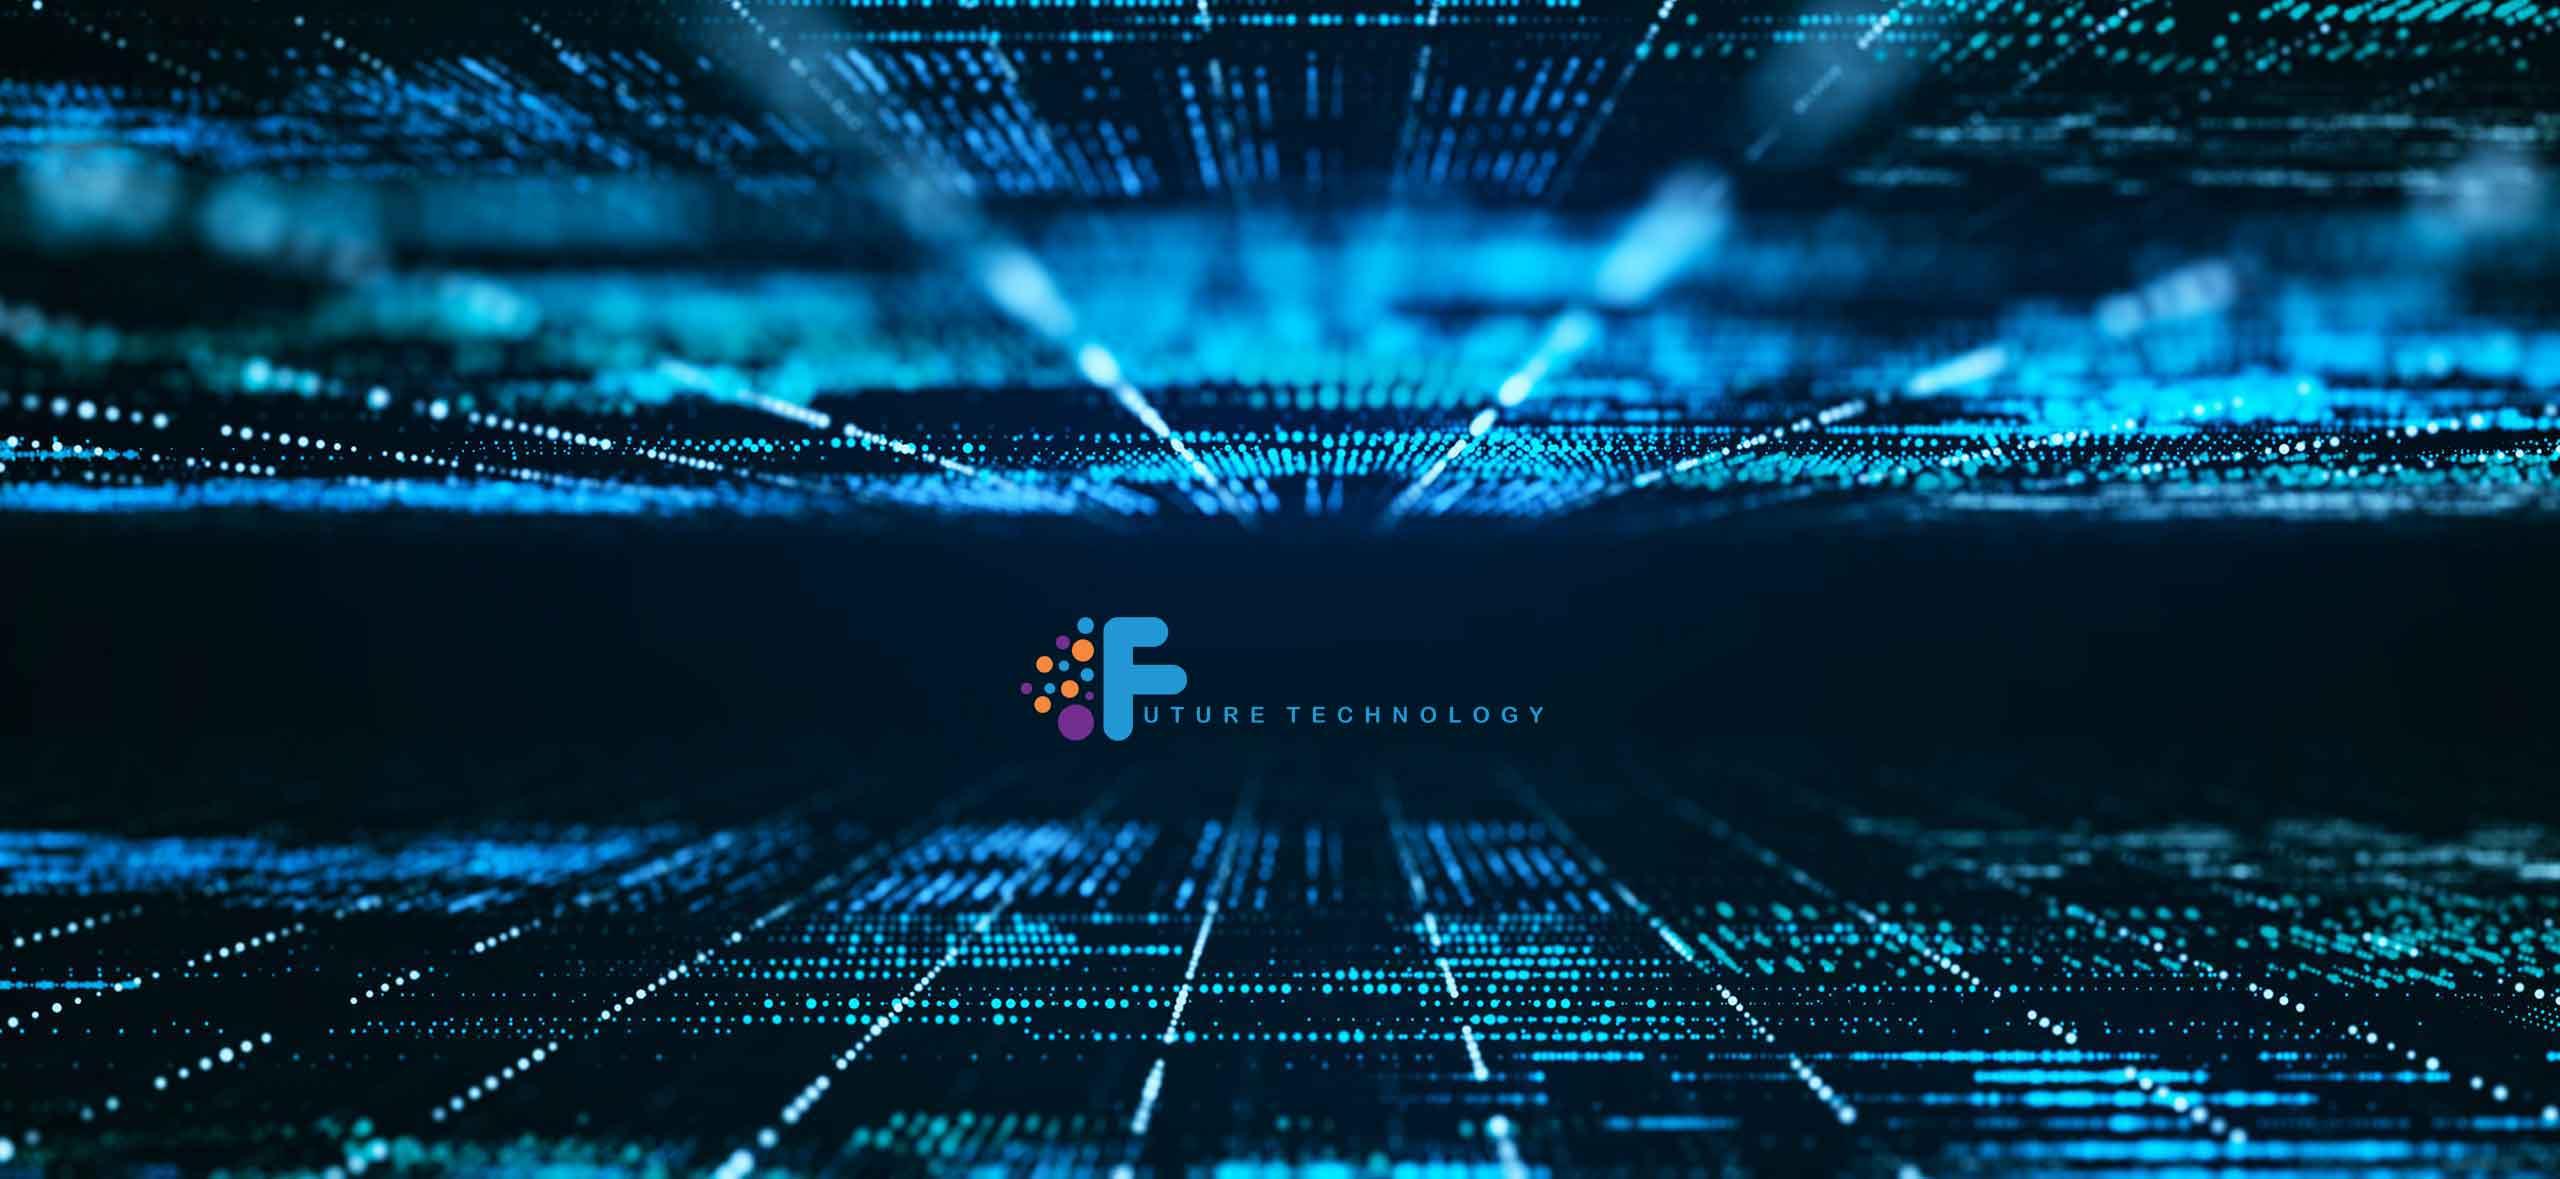 Future Technology is a unique IT company specialising in technology